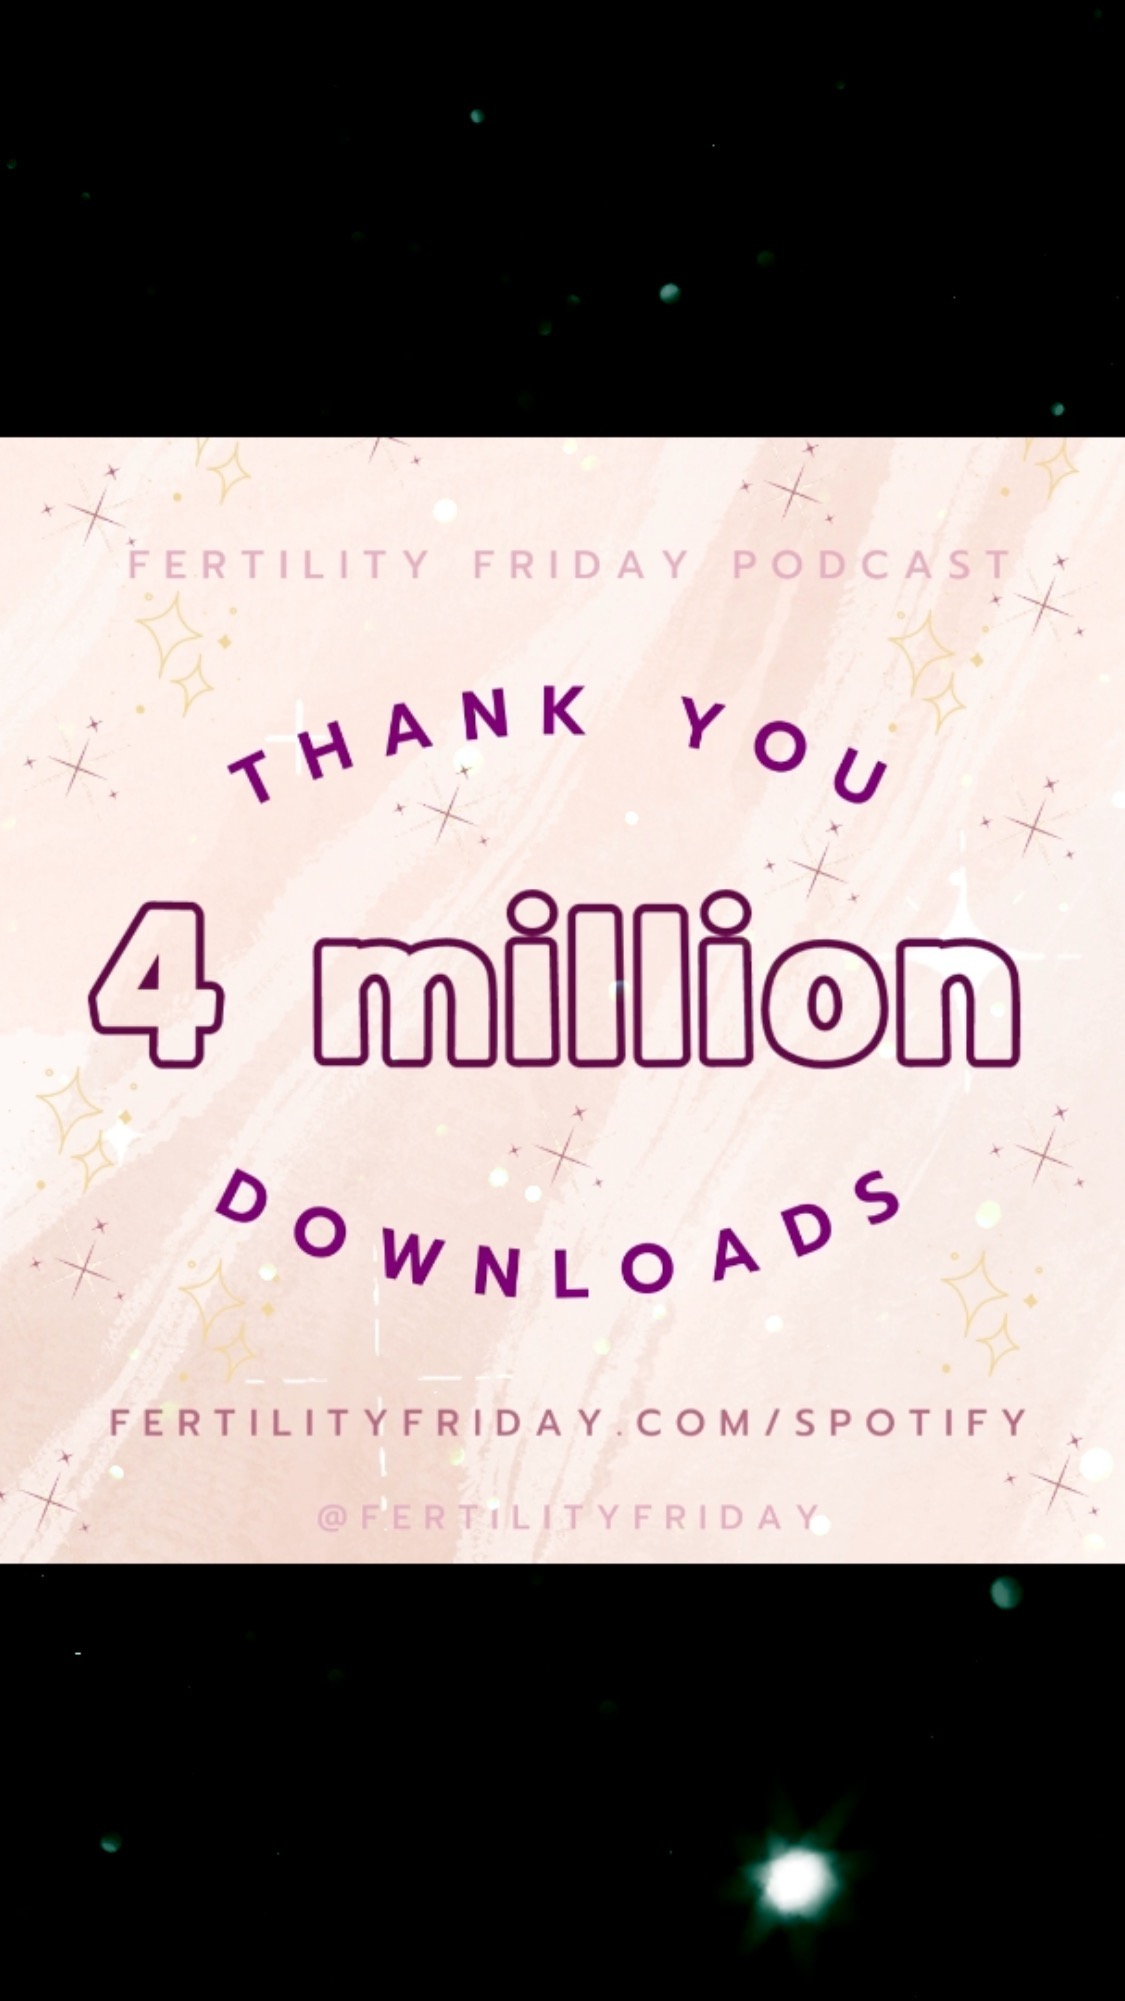 ✨🎉✨ CELEBRATING 4 MILLION DOWNLOADS TODAY!! ✨🎉✨
⠀⠀⠀⠀⠀⠀⠀⠀⠀
I released the first episode of the Fertility Friday podcast in December 2014 ~ just under 8 years ago. 
⠀⠀⠀⠀⠀⠀⠀⠀⠀
Since then an incredible community has formed as a result and many more women are using their menstrual cycles as their 5th vital sign! 
⠀⠀⠀⠀⠀⠀⠀⠀⠀
I want to say a special thank you to everyone who has listened to and supported Fertility Friday! I couldn't have reached this milestone without you! ♥️
⠀⠀⠀⠀⠀⠀⠀⠀⠀
🎧 If you haven't tuned in to the podcast yet, you'll find it by searching "Fertility Friday" in your favourite podcast player, and there are also Spotify and Apple Podcasts links is also in my bio @FertilityFriday 🎧
⠀⠀⠀⠀⠀⠀⠀⠀⠀
When did you discover the podcast? How long have you been listening? Let us know in the comments below!👇🏾
⠀⠀⠀⠀⠀⠀⠀⠀⠀
#FertilityFriday #birthcontrol #thepill #FertilityAwareness #TheFifthVitalSign #womenhelpingwomen #womensupportingwomen #menstruationmatters #hormones #pregnancy #fertility #fertilityawarenessmethod #postbirthcontrolsyndrome #mythsandfacts #feminist #womenshealth #periods #NFP #FAM #gaslighting #medicalgaslighting #TheFifthVitalSignBook #periodprobs #periodproblems #periodpain #feminism #advocacy #sideeffects #podcast